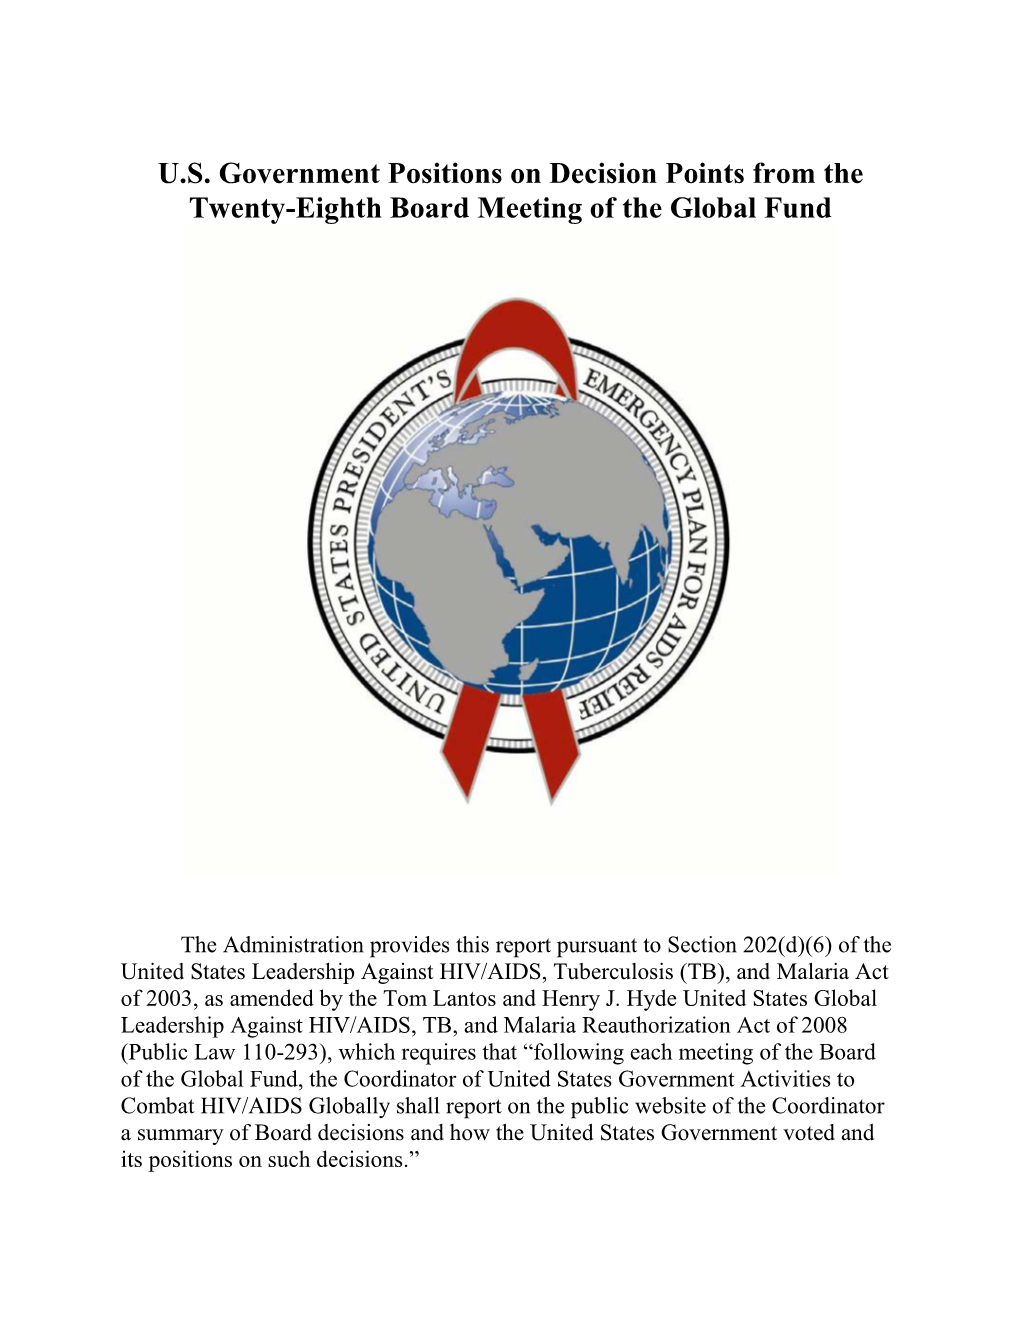 U.S. Government Positions on Decision Points from the Twenty-Eighth Board Meeting of the Global Fund